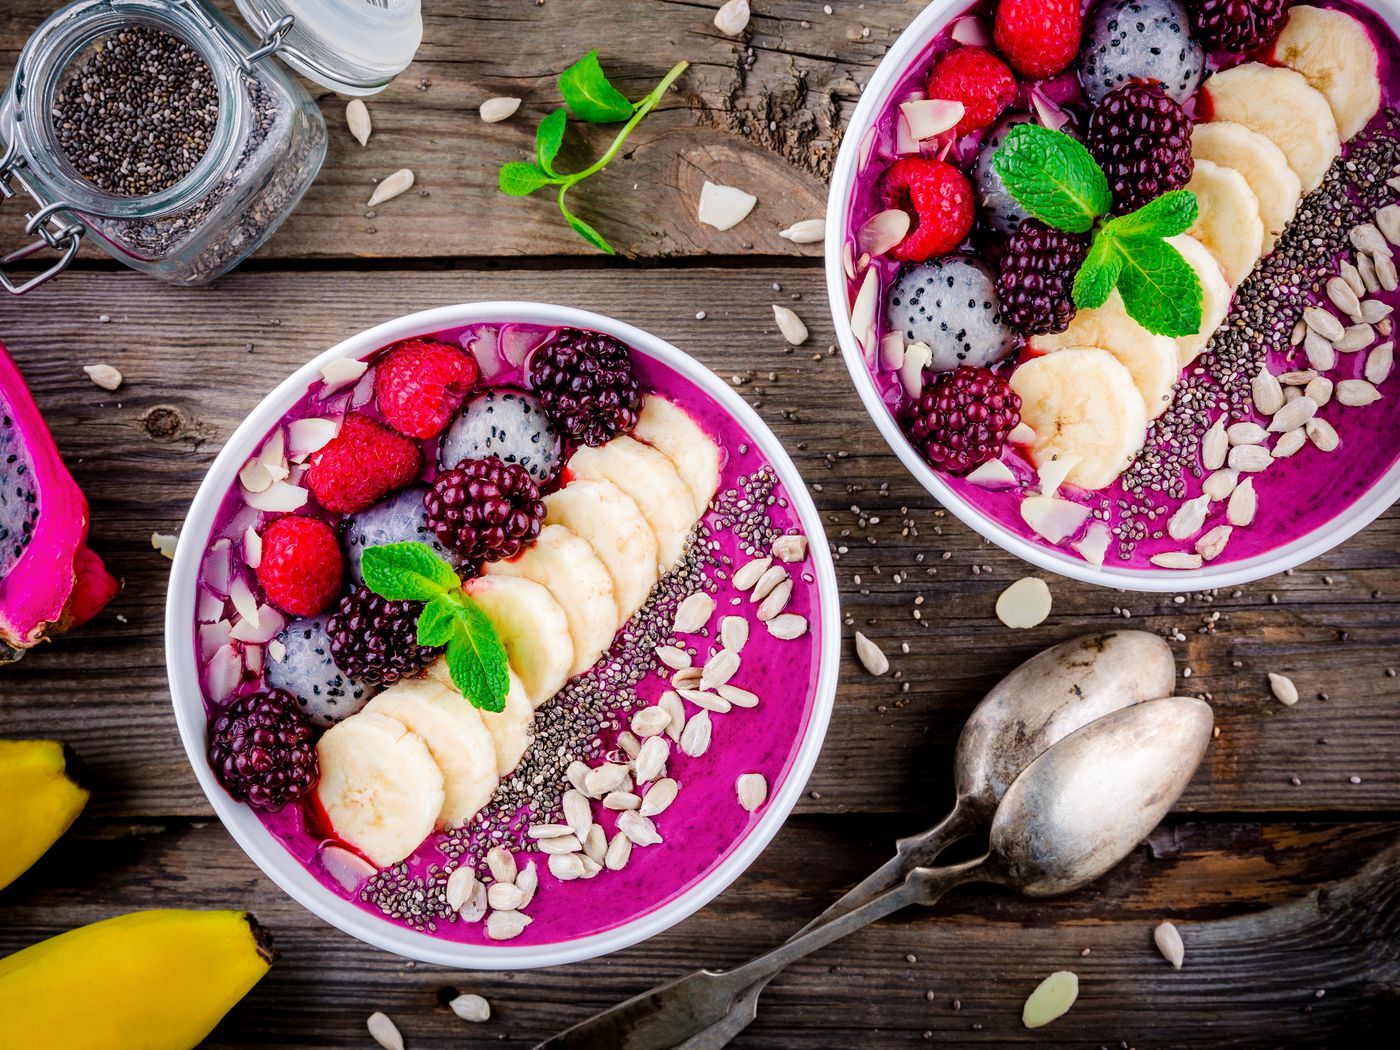 What Are Smoothie Bowls and Why Do They Exist? - Eater